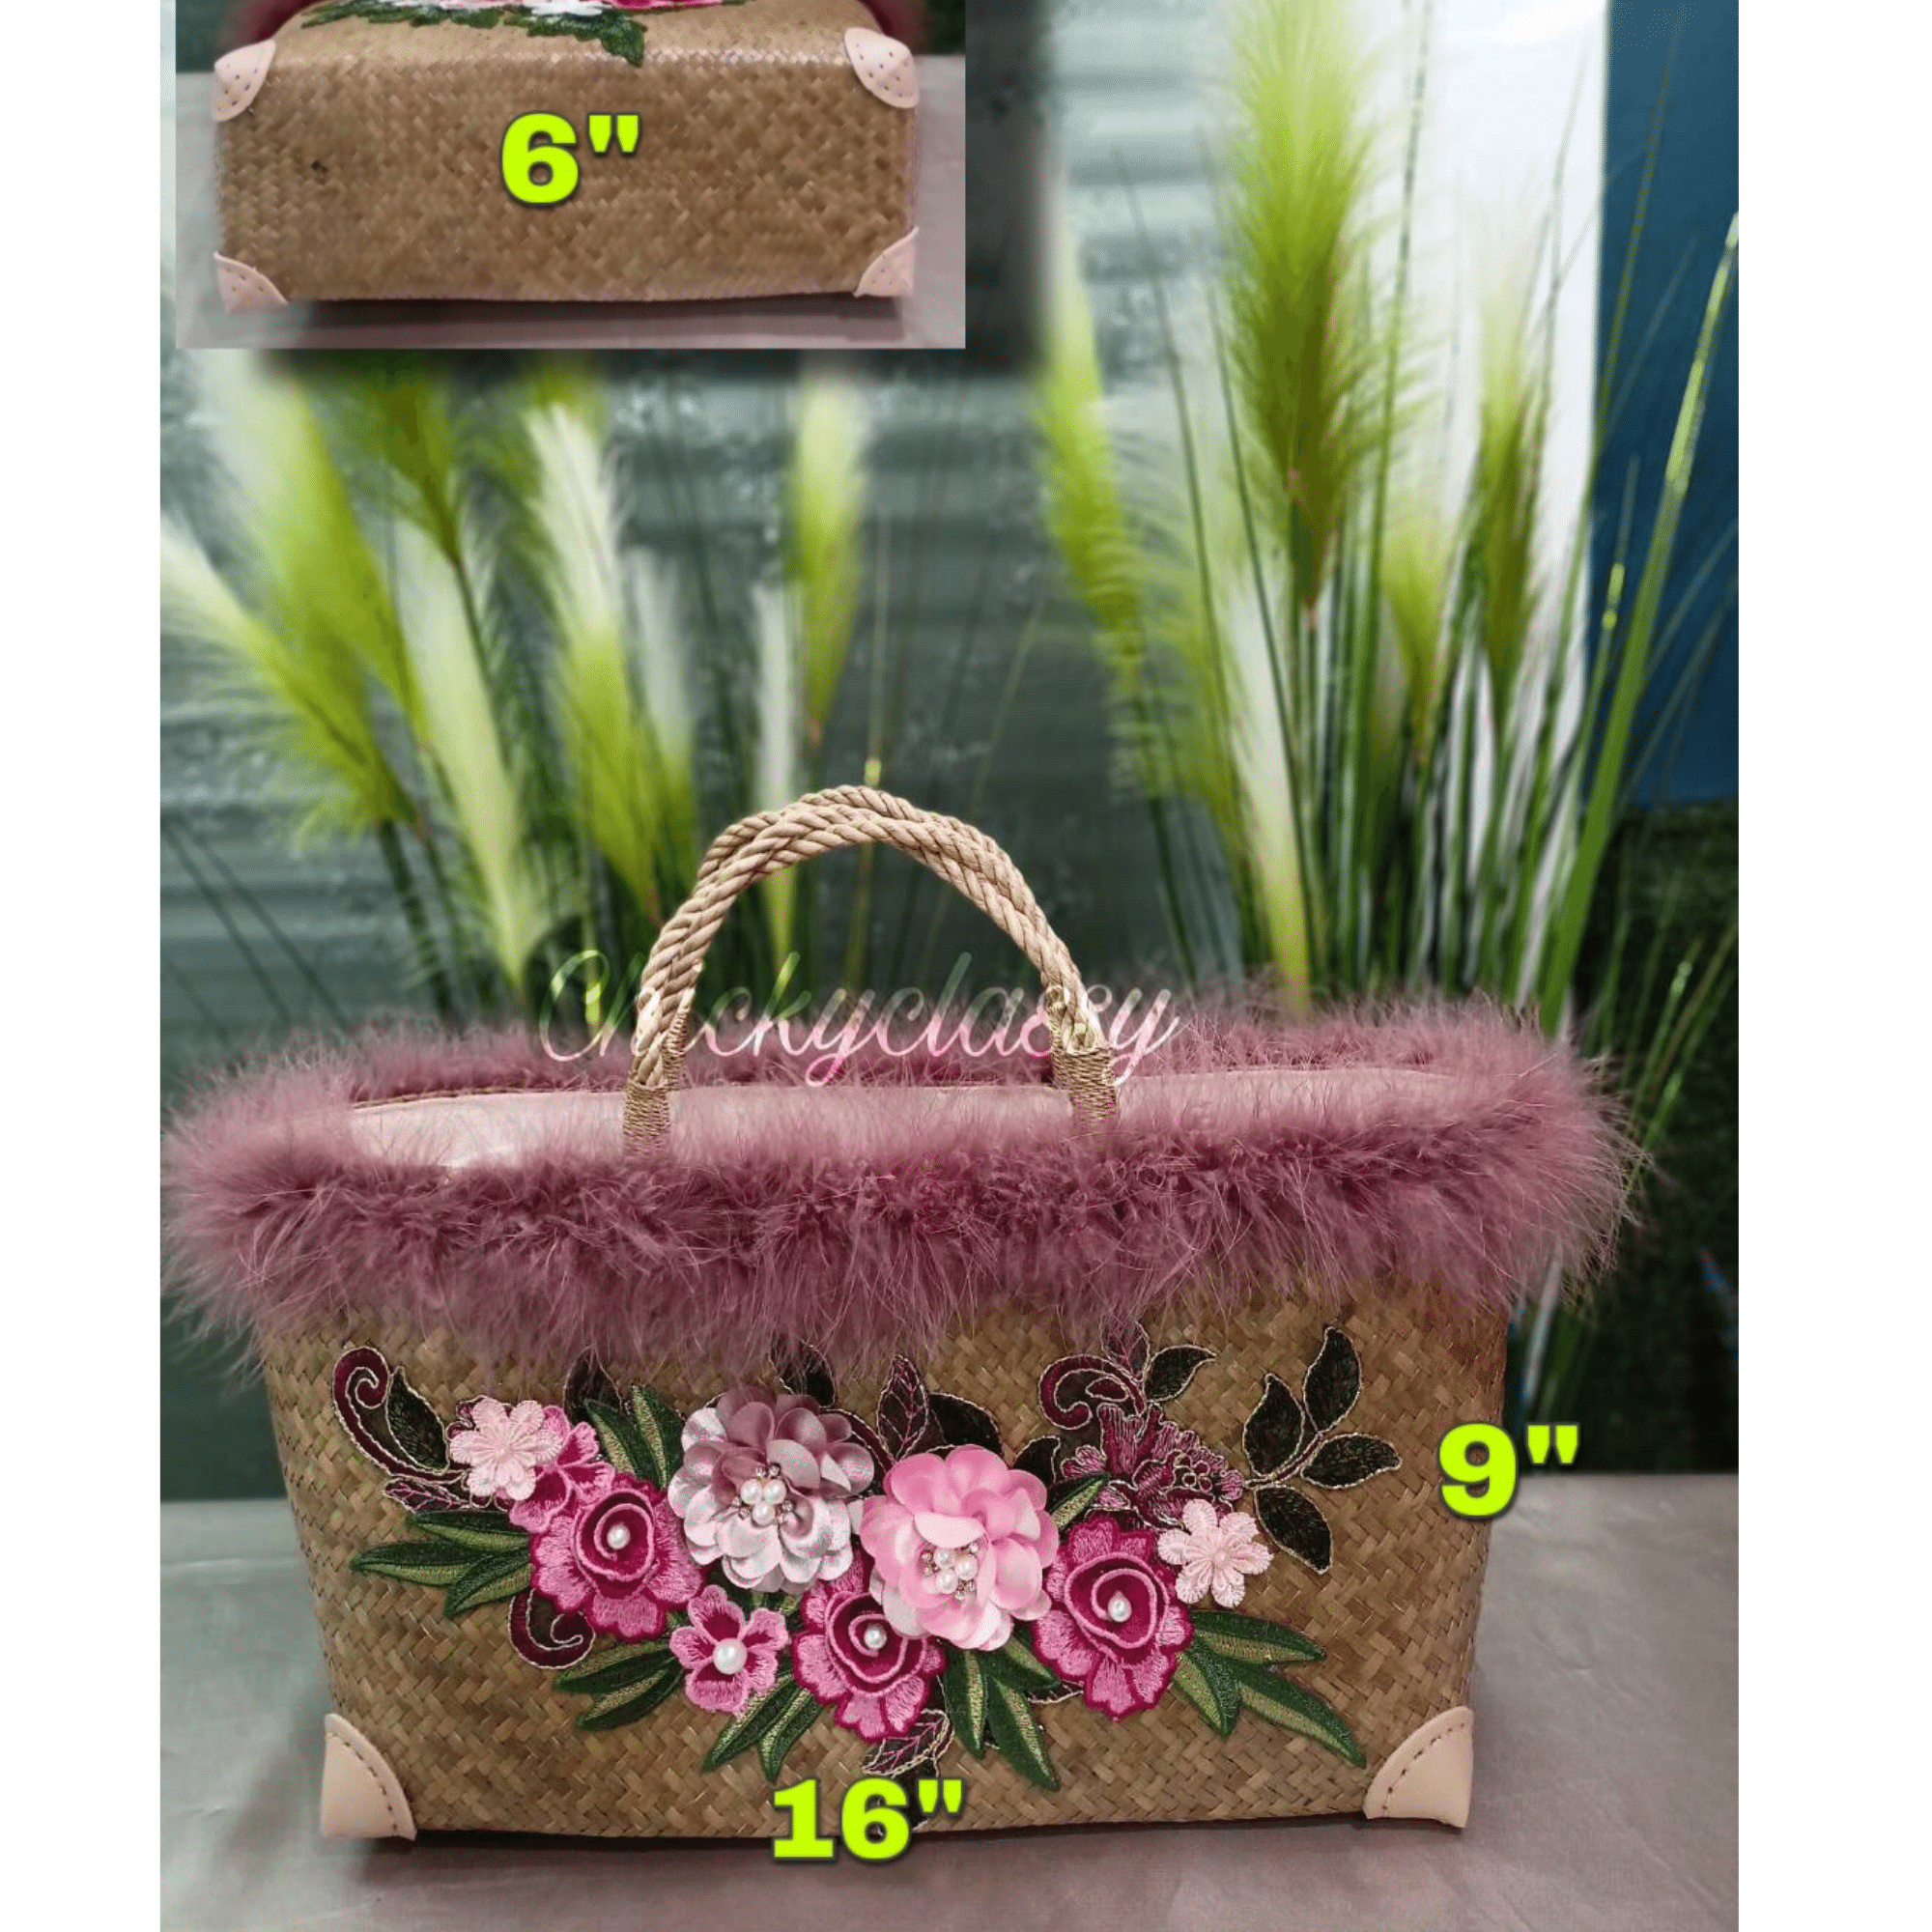 classic Straw bag for all occasions take me with you